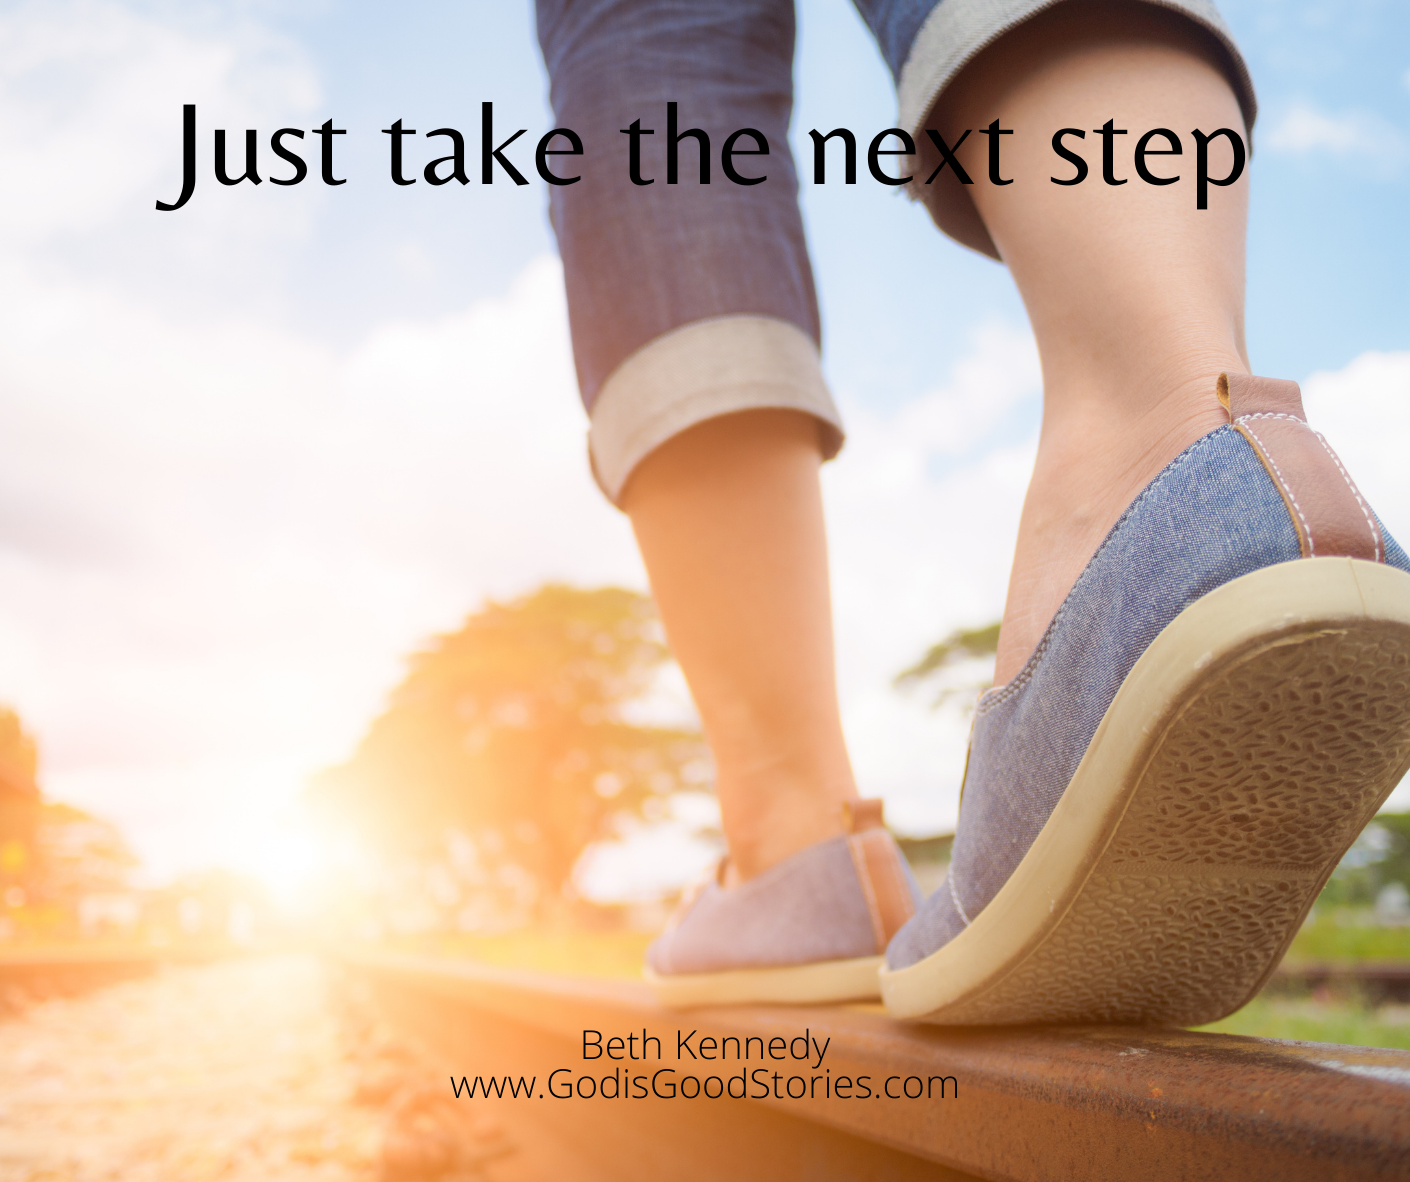 Just take the next step